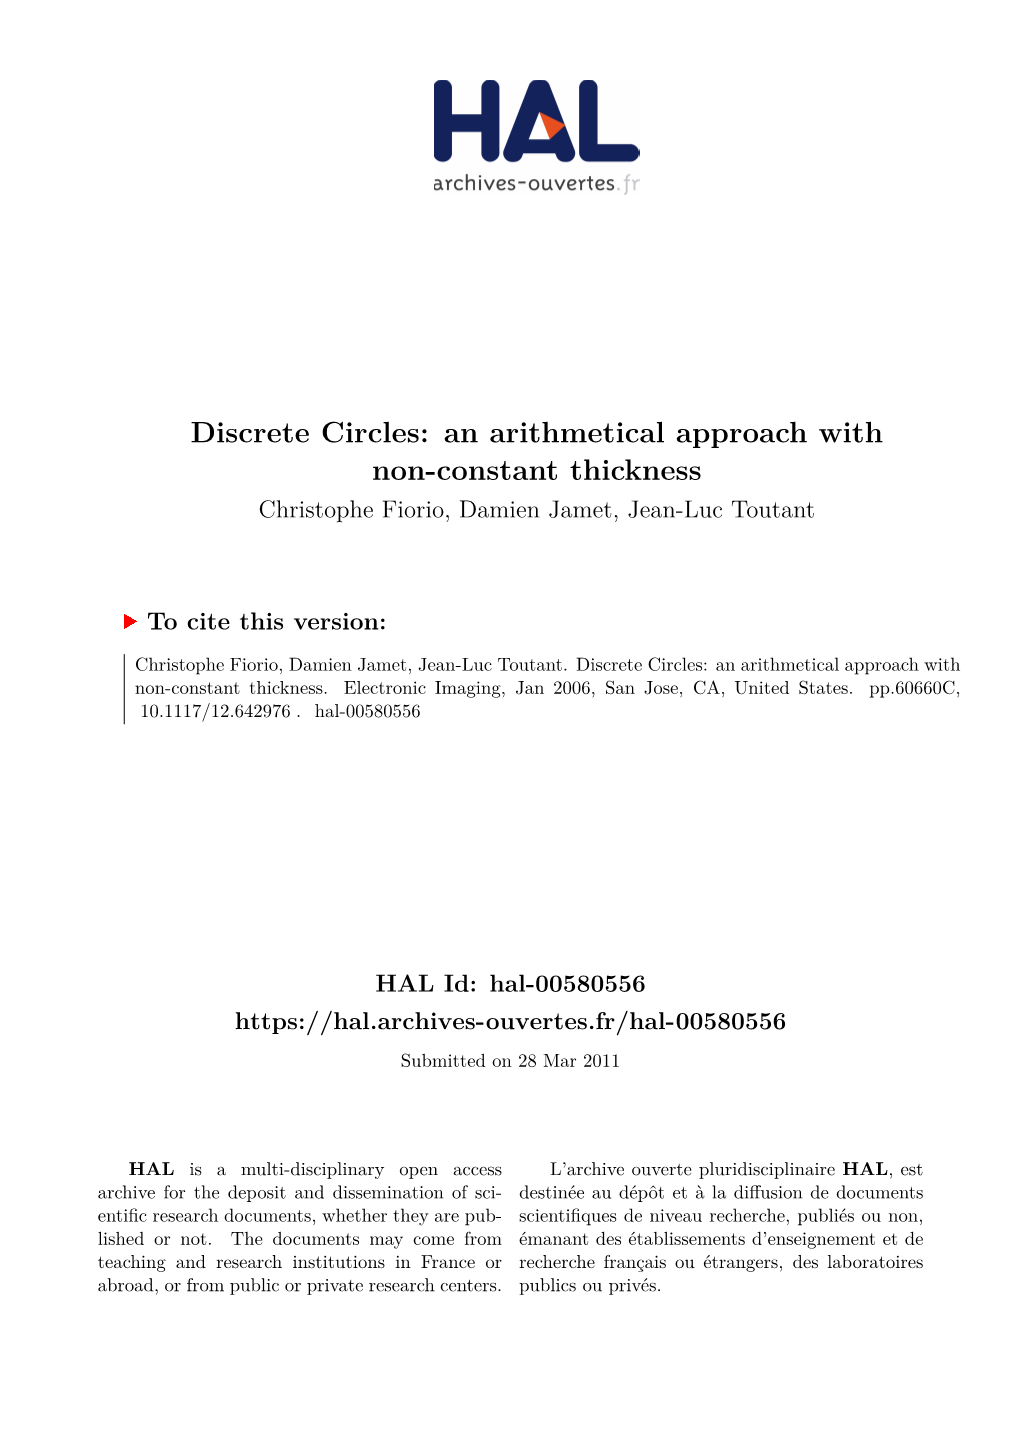 Discrete Circles: an Arithmetical Approach with Non-Constant Thickness Christophe Fiorio, Damien Jamet, Jean-Luc Toutant